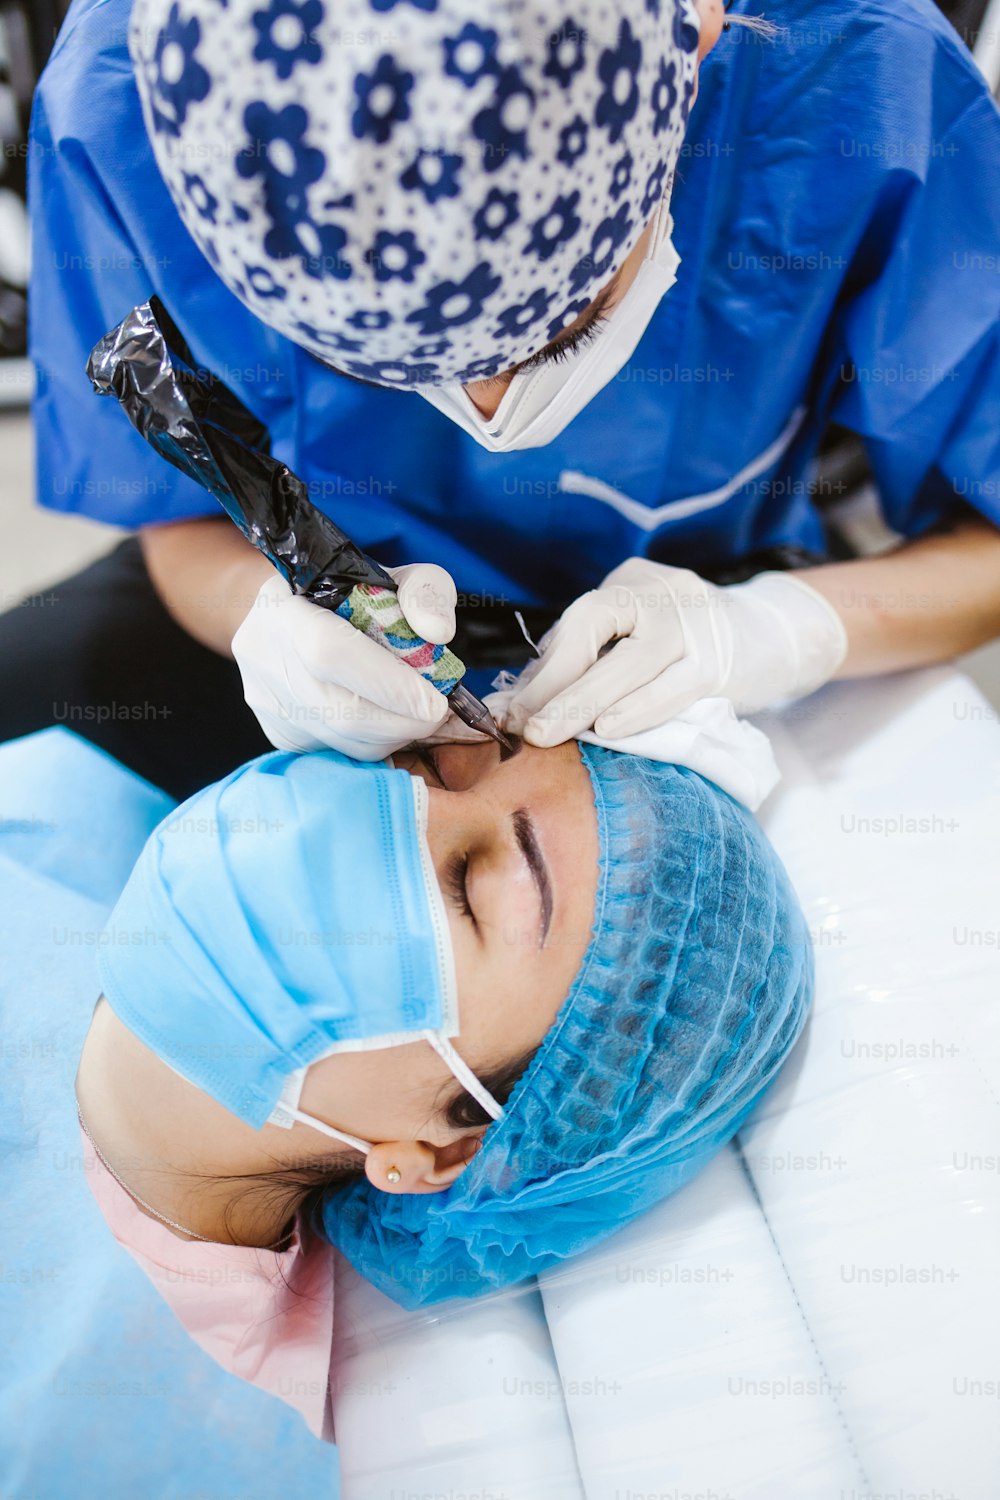 Latin Cosmetologist preparing to mexican woman for eyebrow permanent makeup procedure in Mexico, Microblading closeup